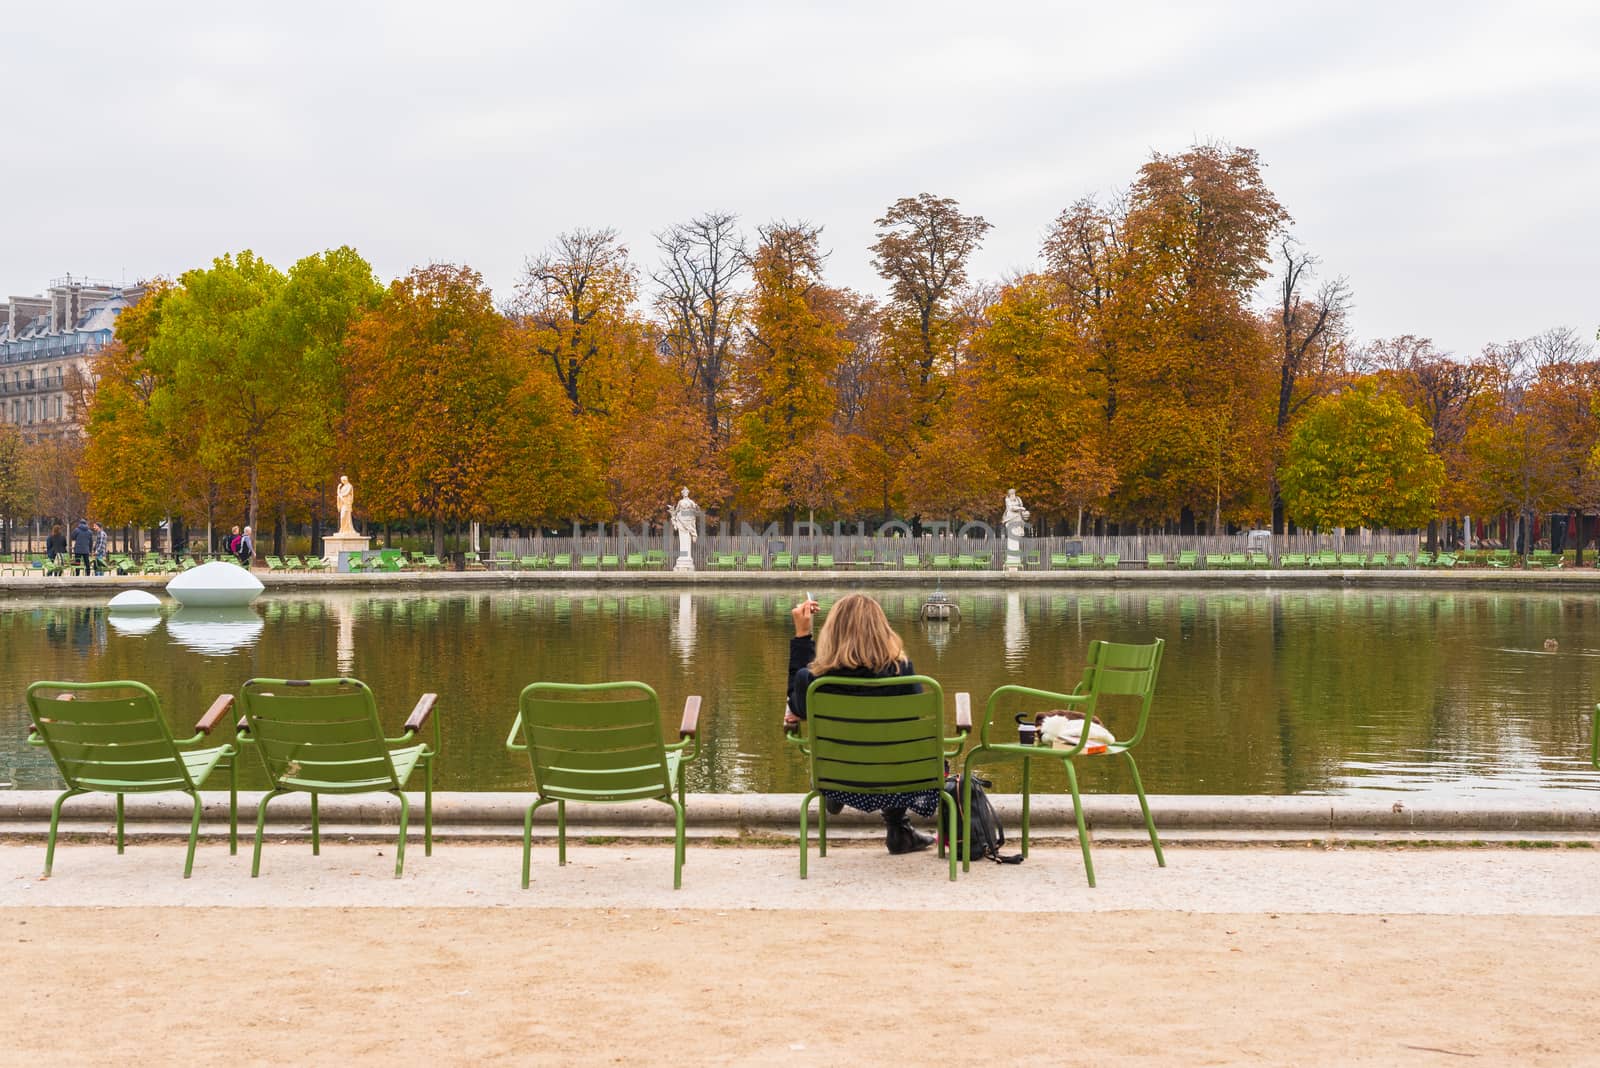 Paris, France -- November 3, 2017 -- Woman having a smoke by the pond in the Tuileries Gardens.